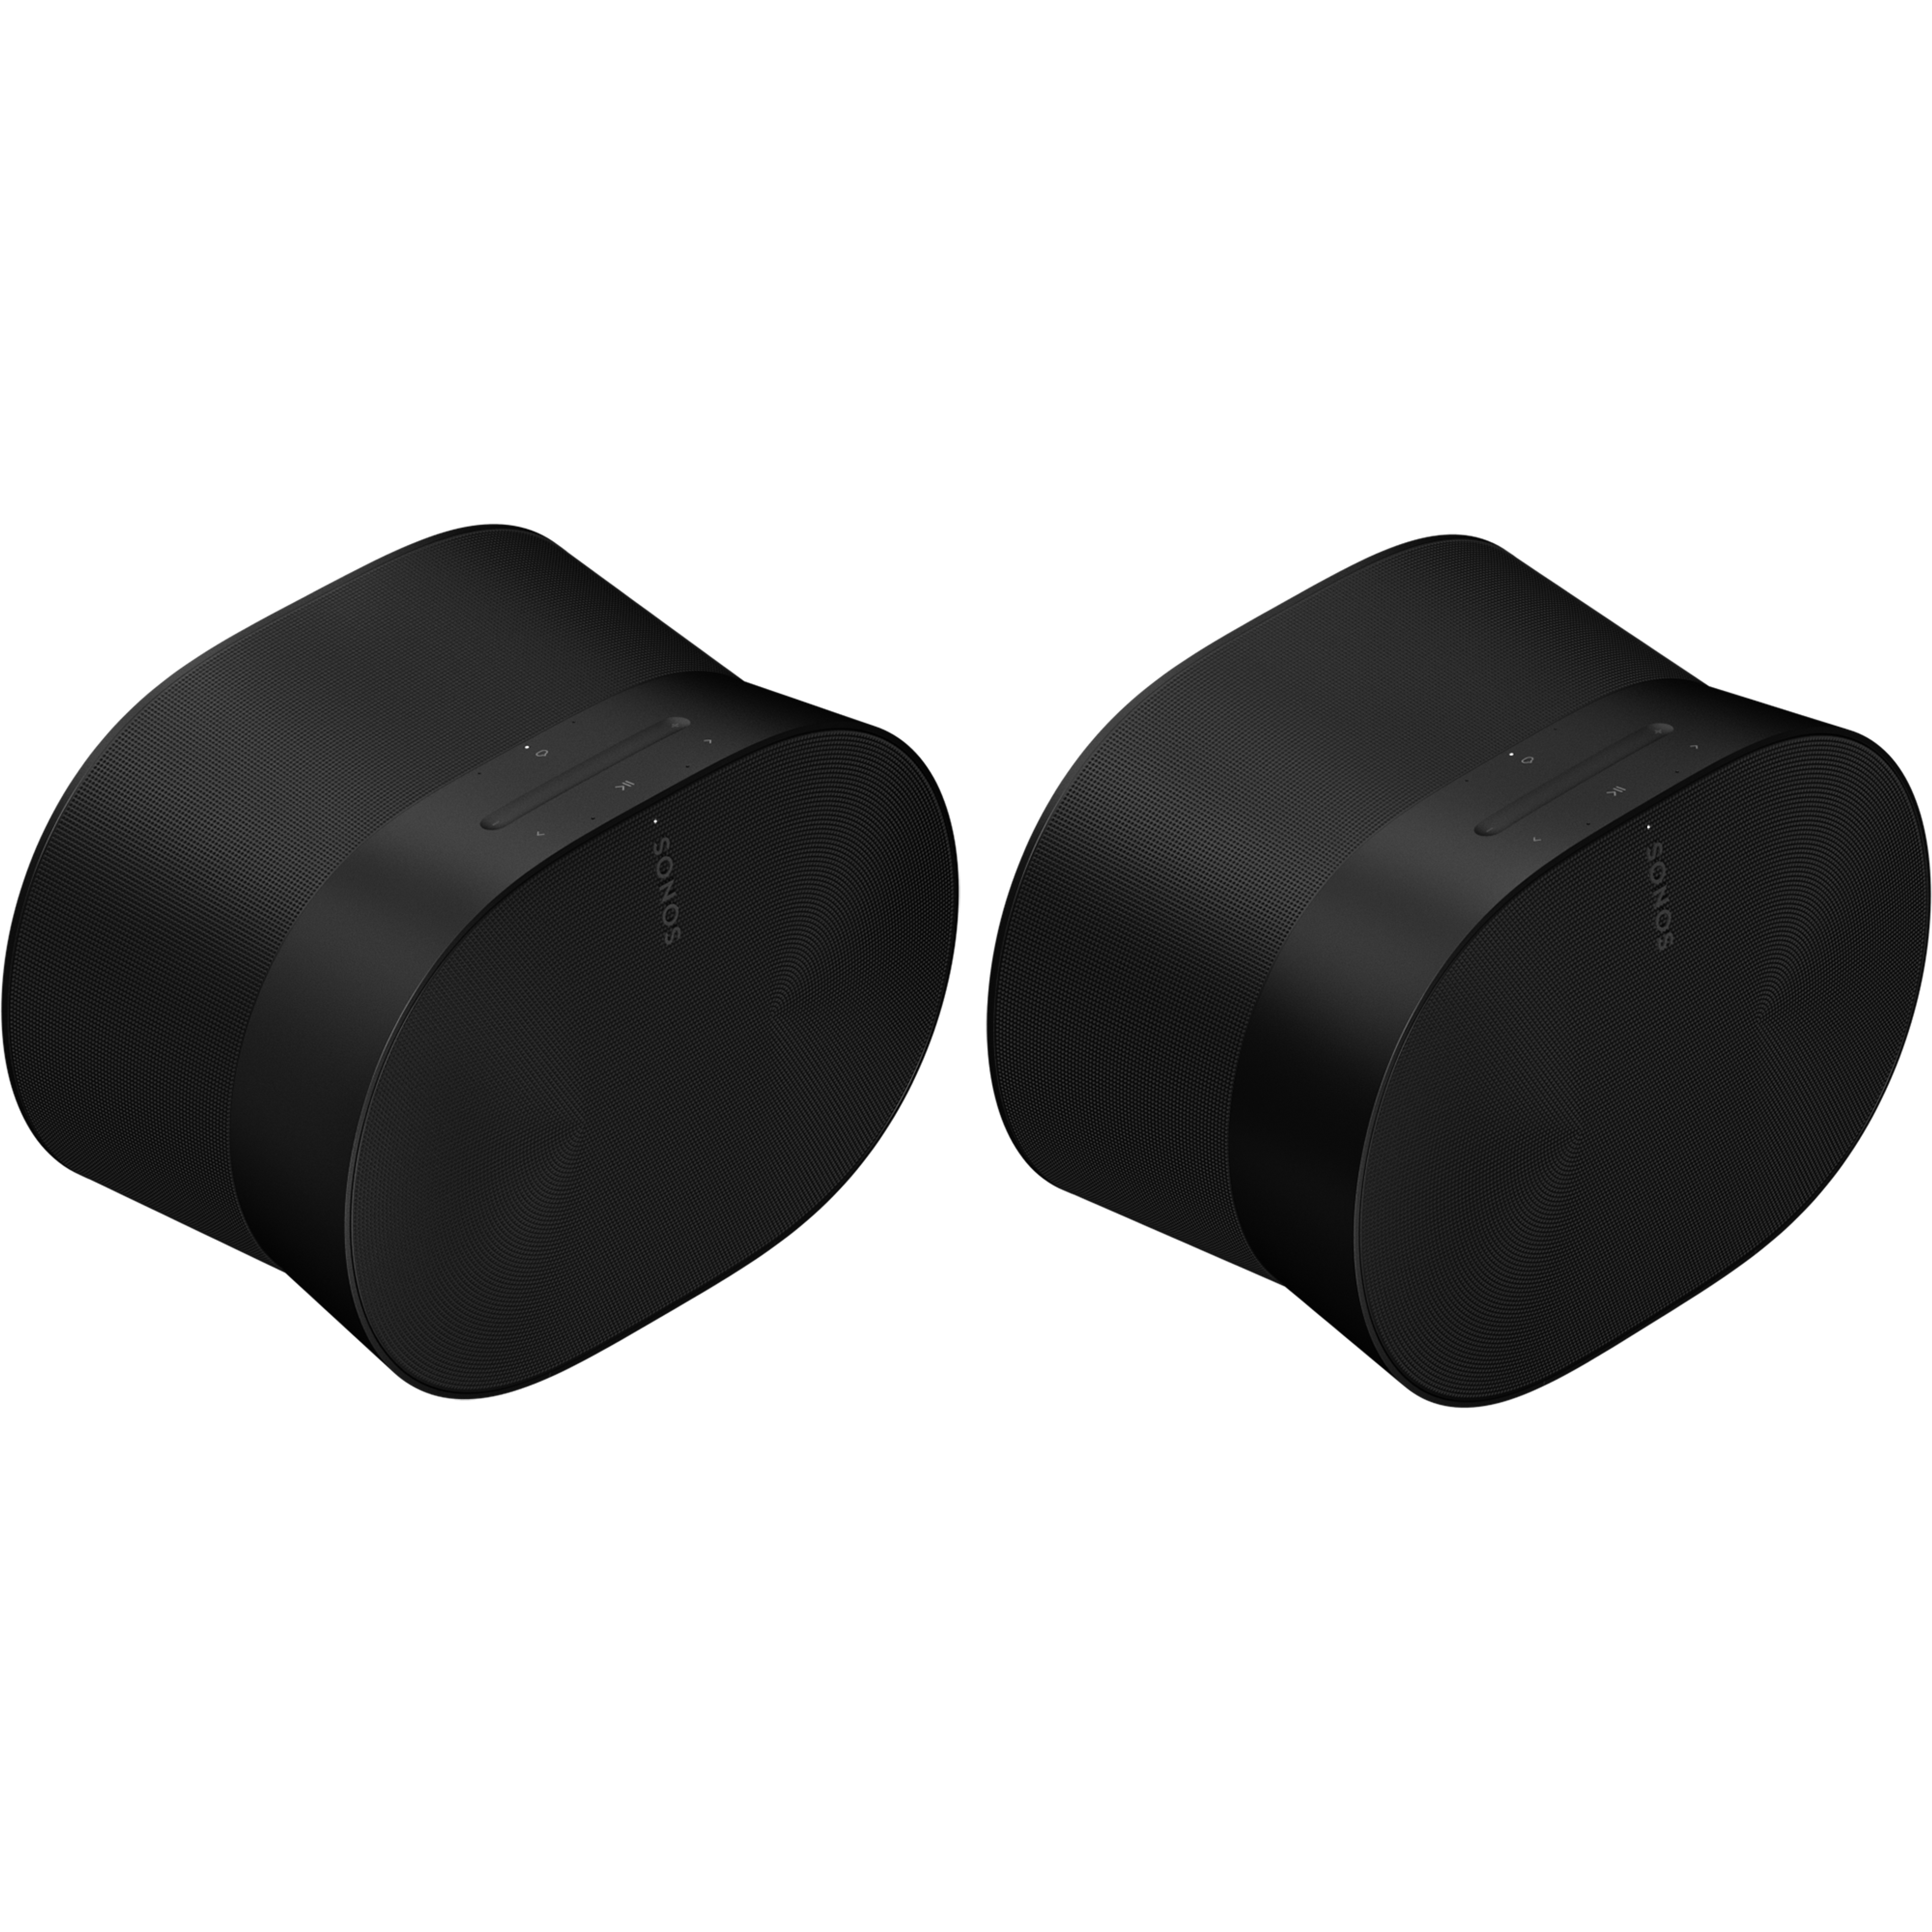 Image of two black Sonos Era 300 speakers side by side turned at an angle